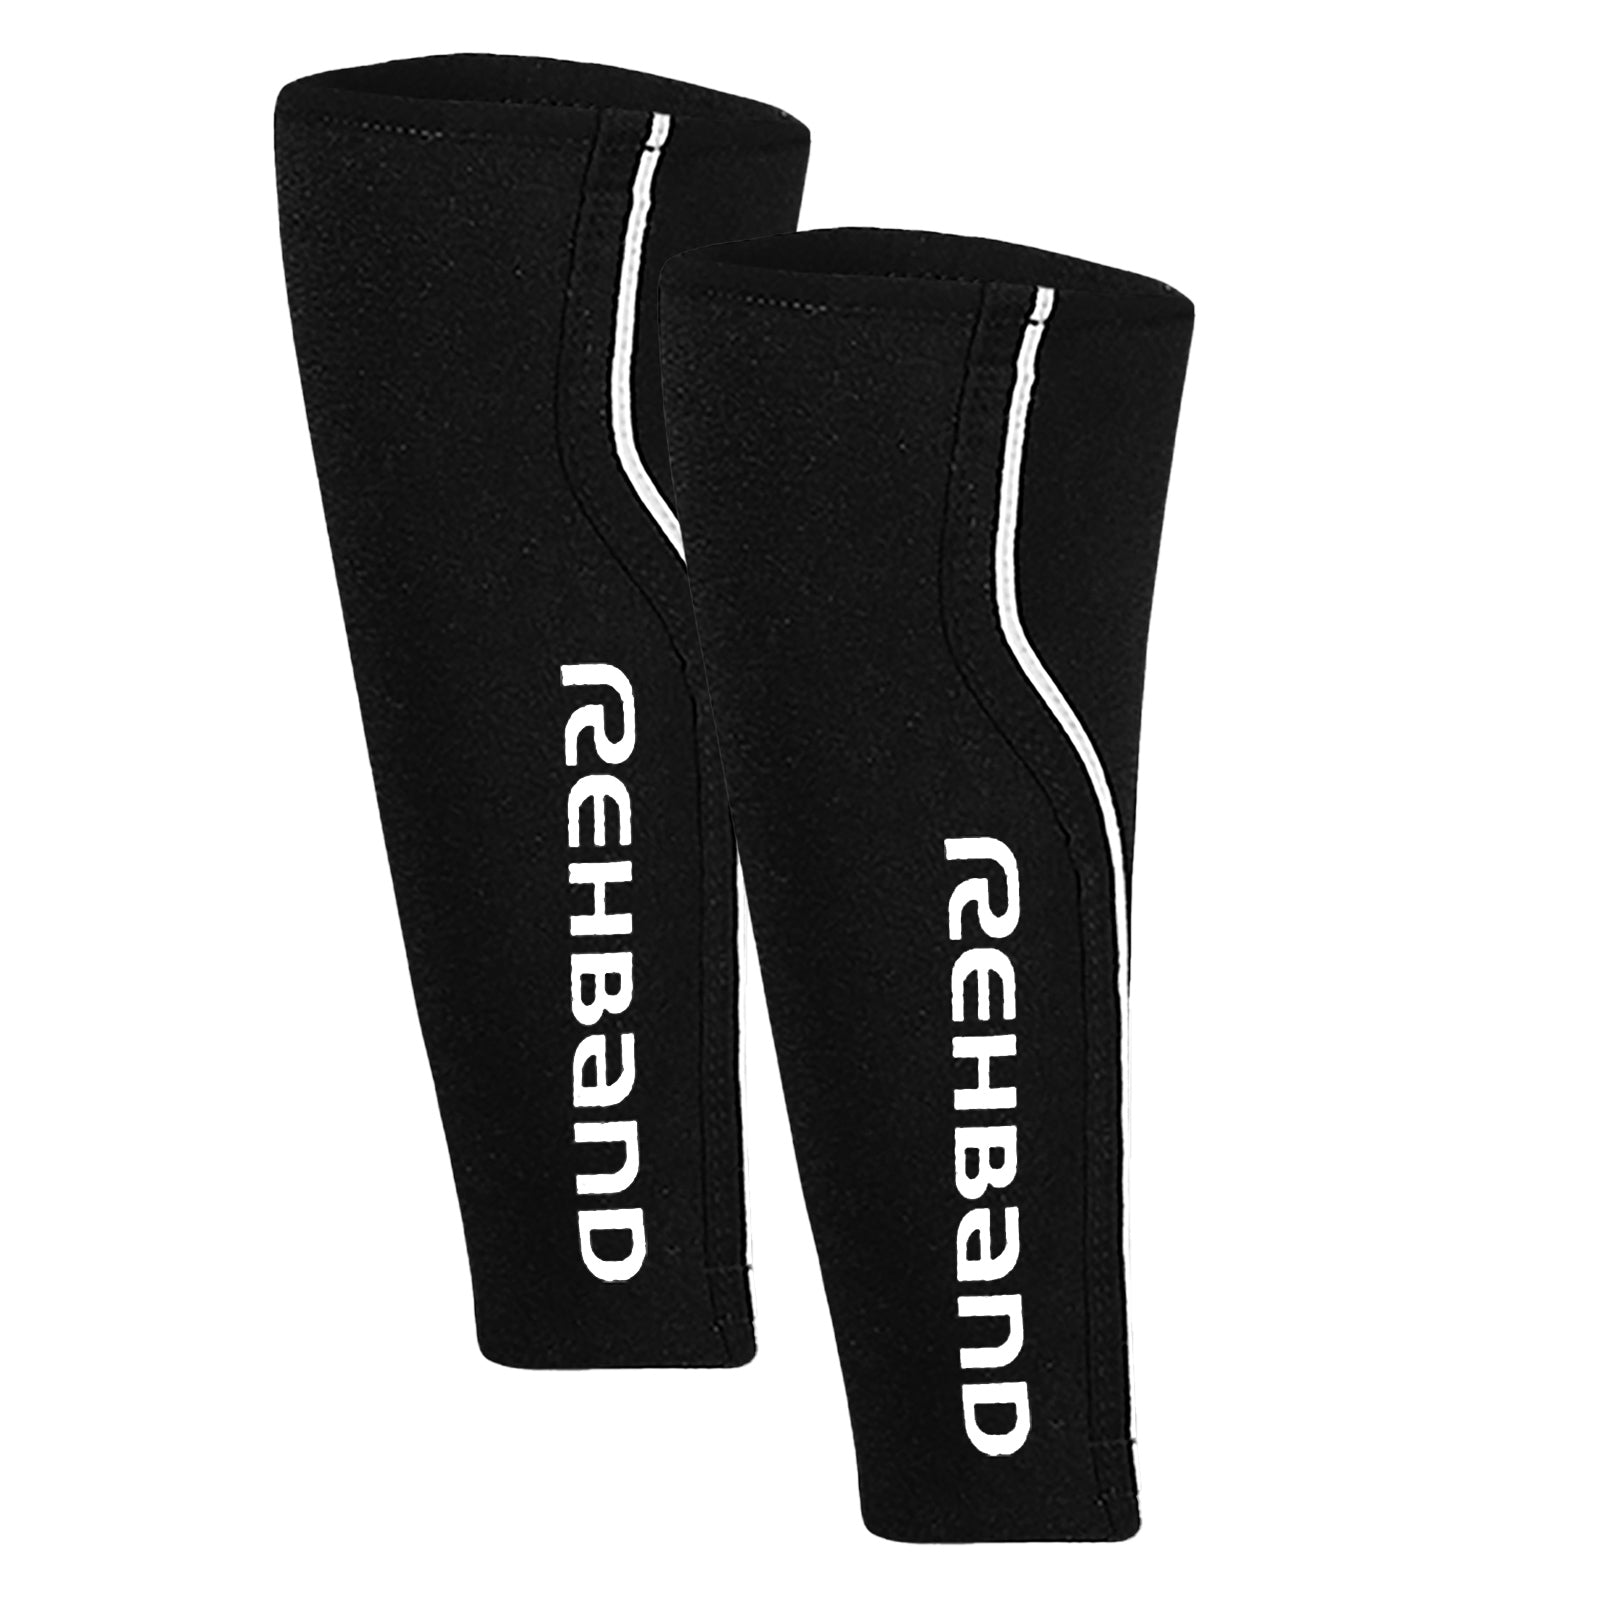 Two black forearm sleeves with a white Rehband lettering at the side